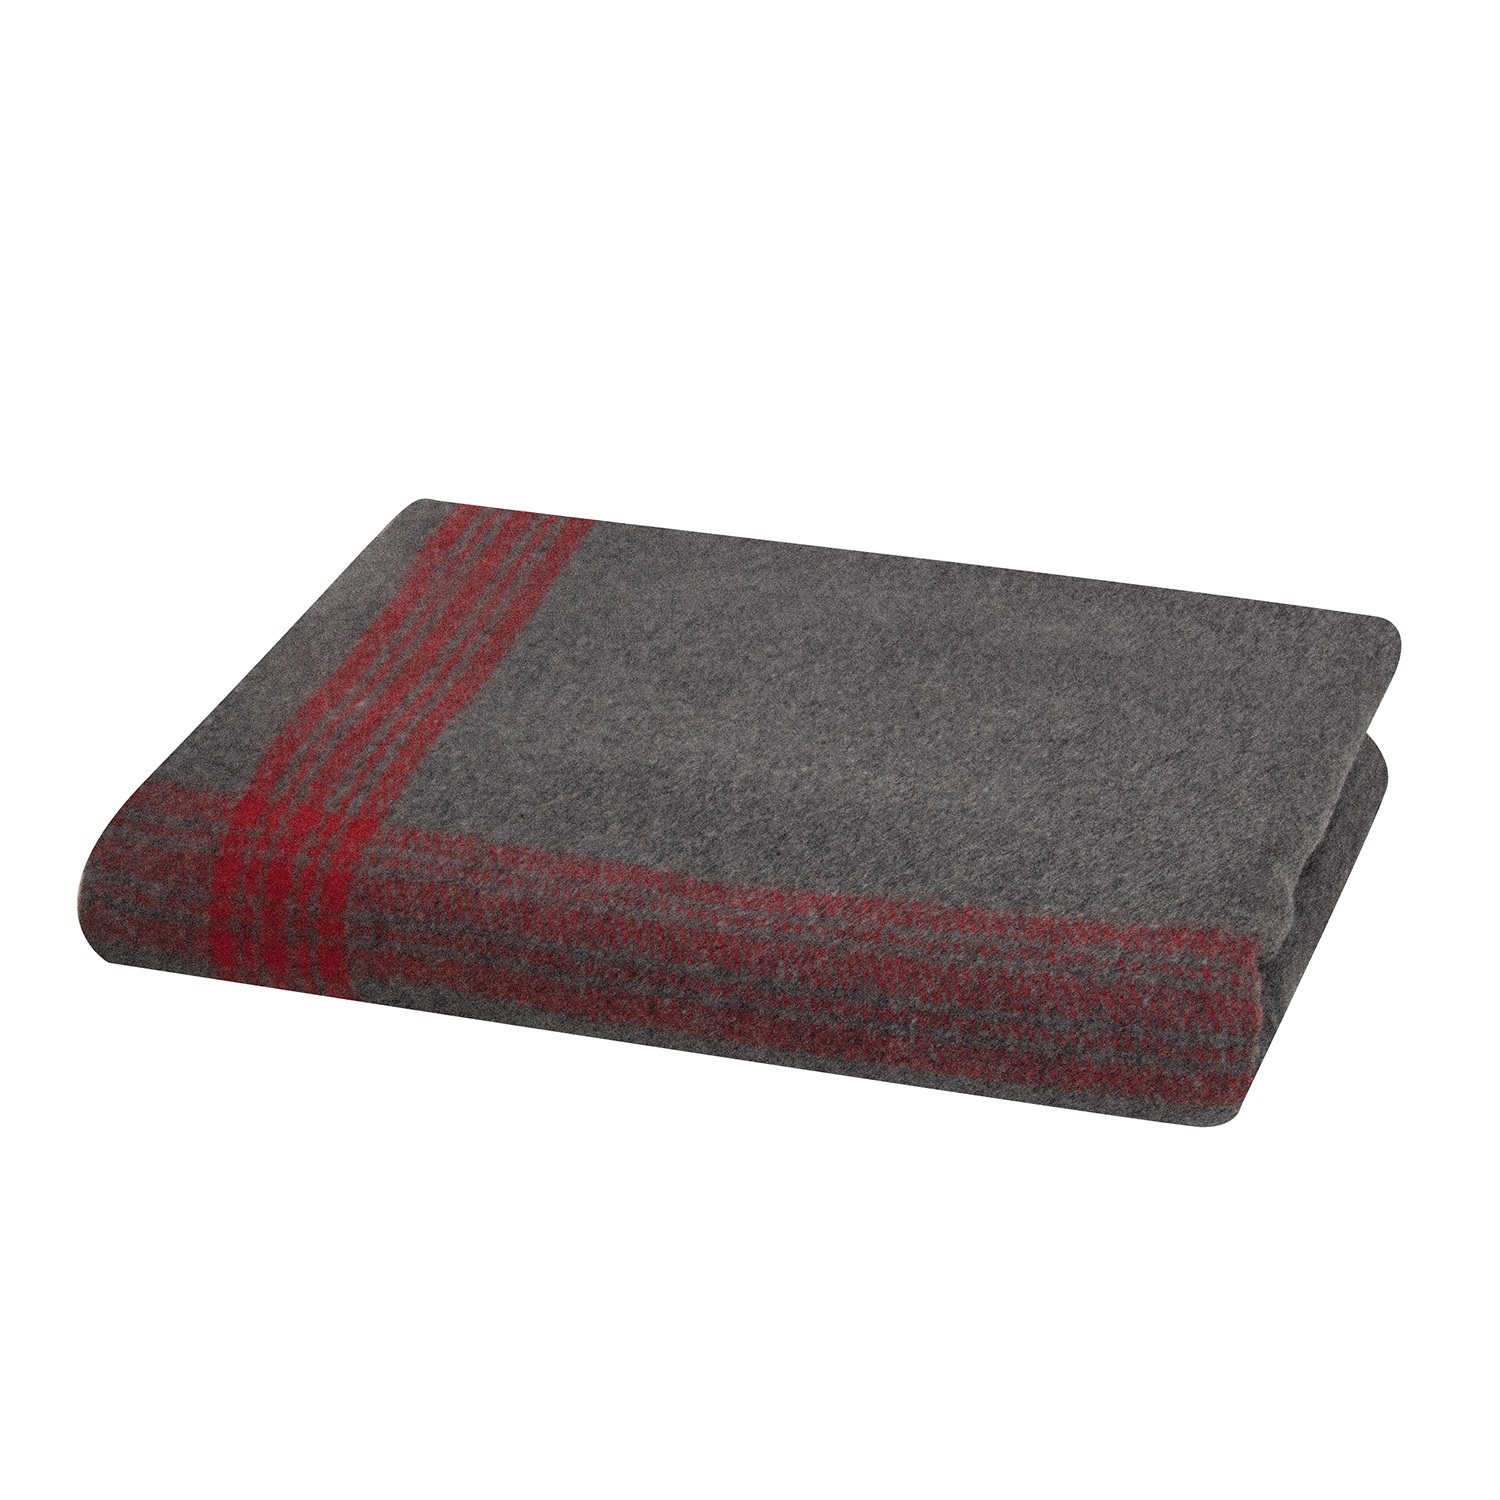 Striped Wool Blanket GREY/RED ROTHCO 1096 L-11